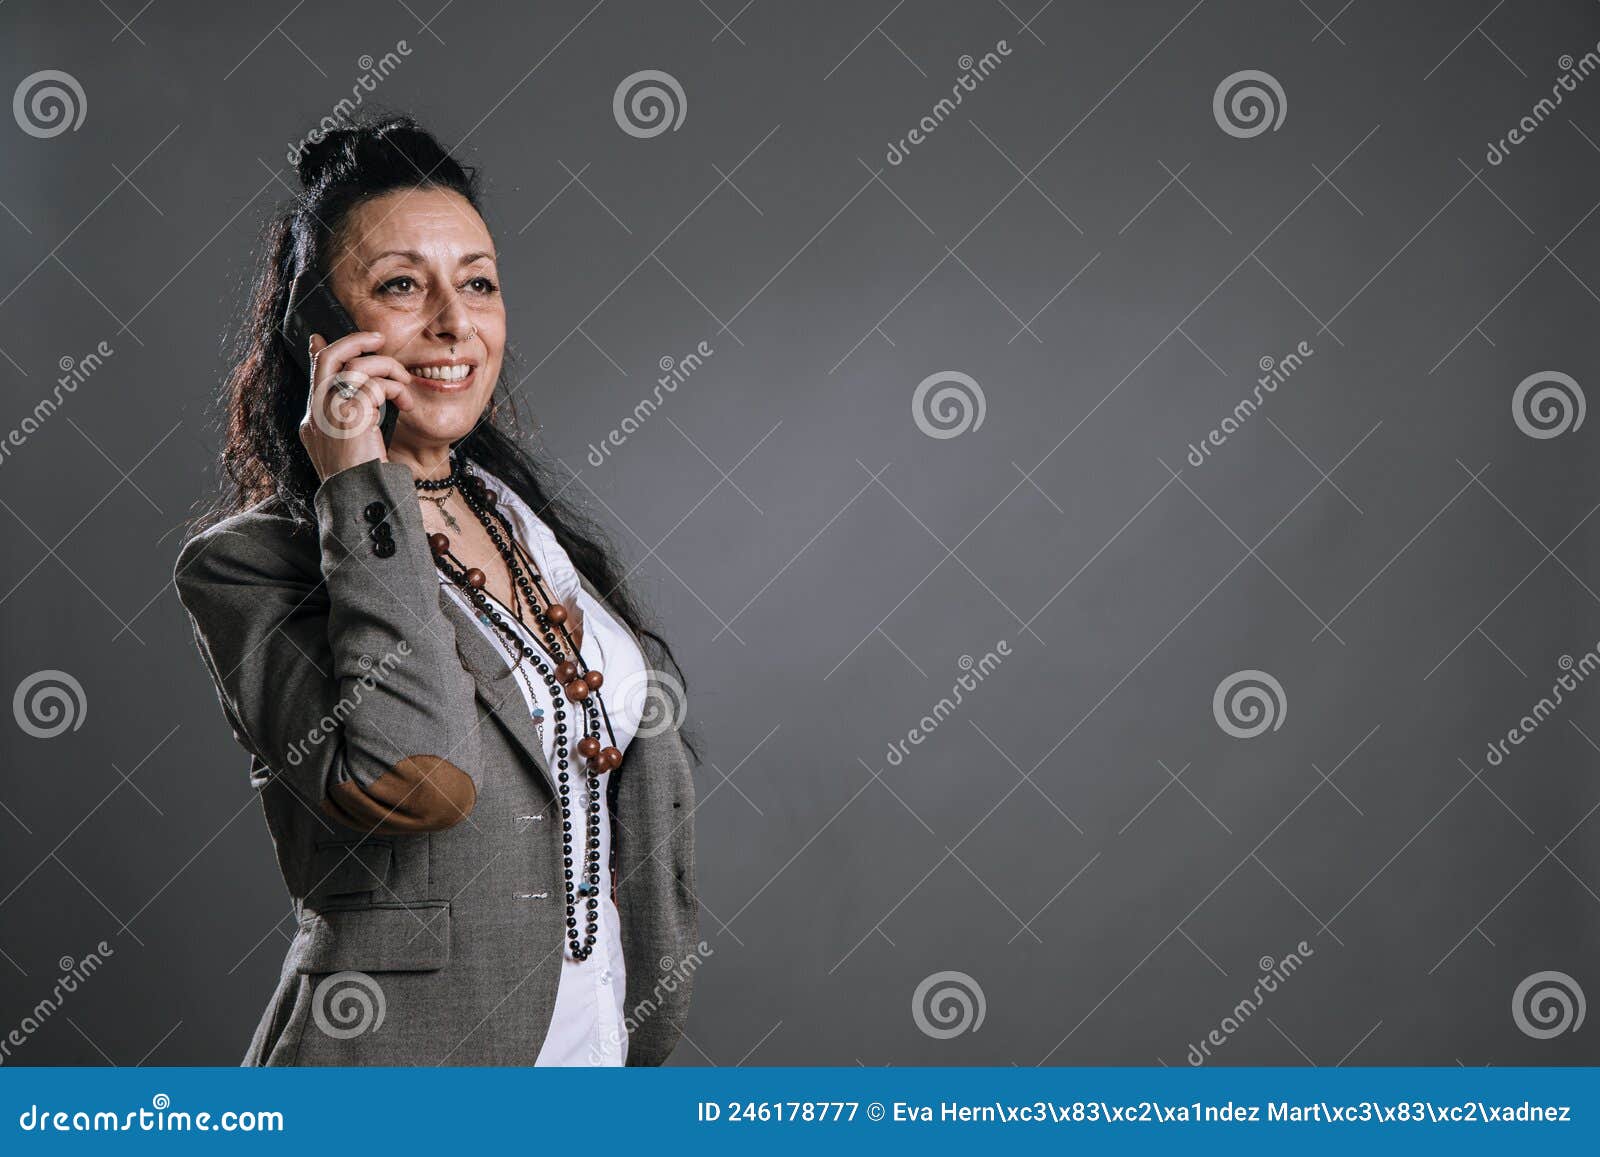 alternative woman dressed in jacket suit smilingly attends to her mobile phone in study shot